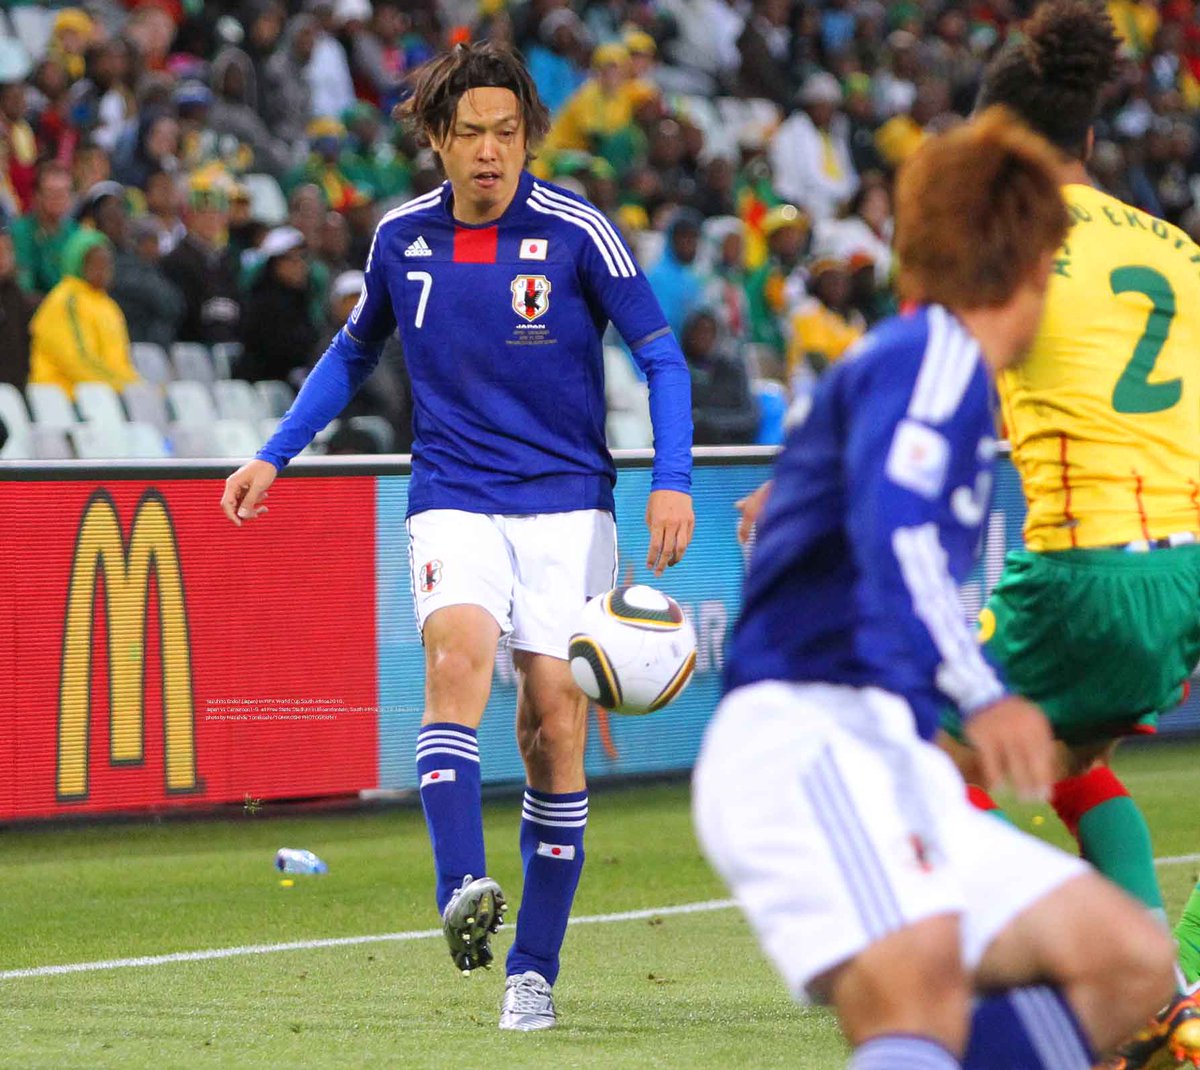 Tphoto On Twitter 遠藤保仁７ 日本代表 2010ワールドカップ南アフリカ Yasuhito Endo7 Japan In Fifa World Cup South Africa2010 Japan Vs Cameroon1 0 At Free State Stadium In Bloemfontein Thomsoutherland Africa On 14 June 2010 Photo By Masahde